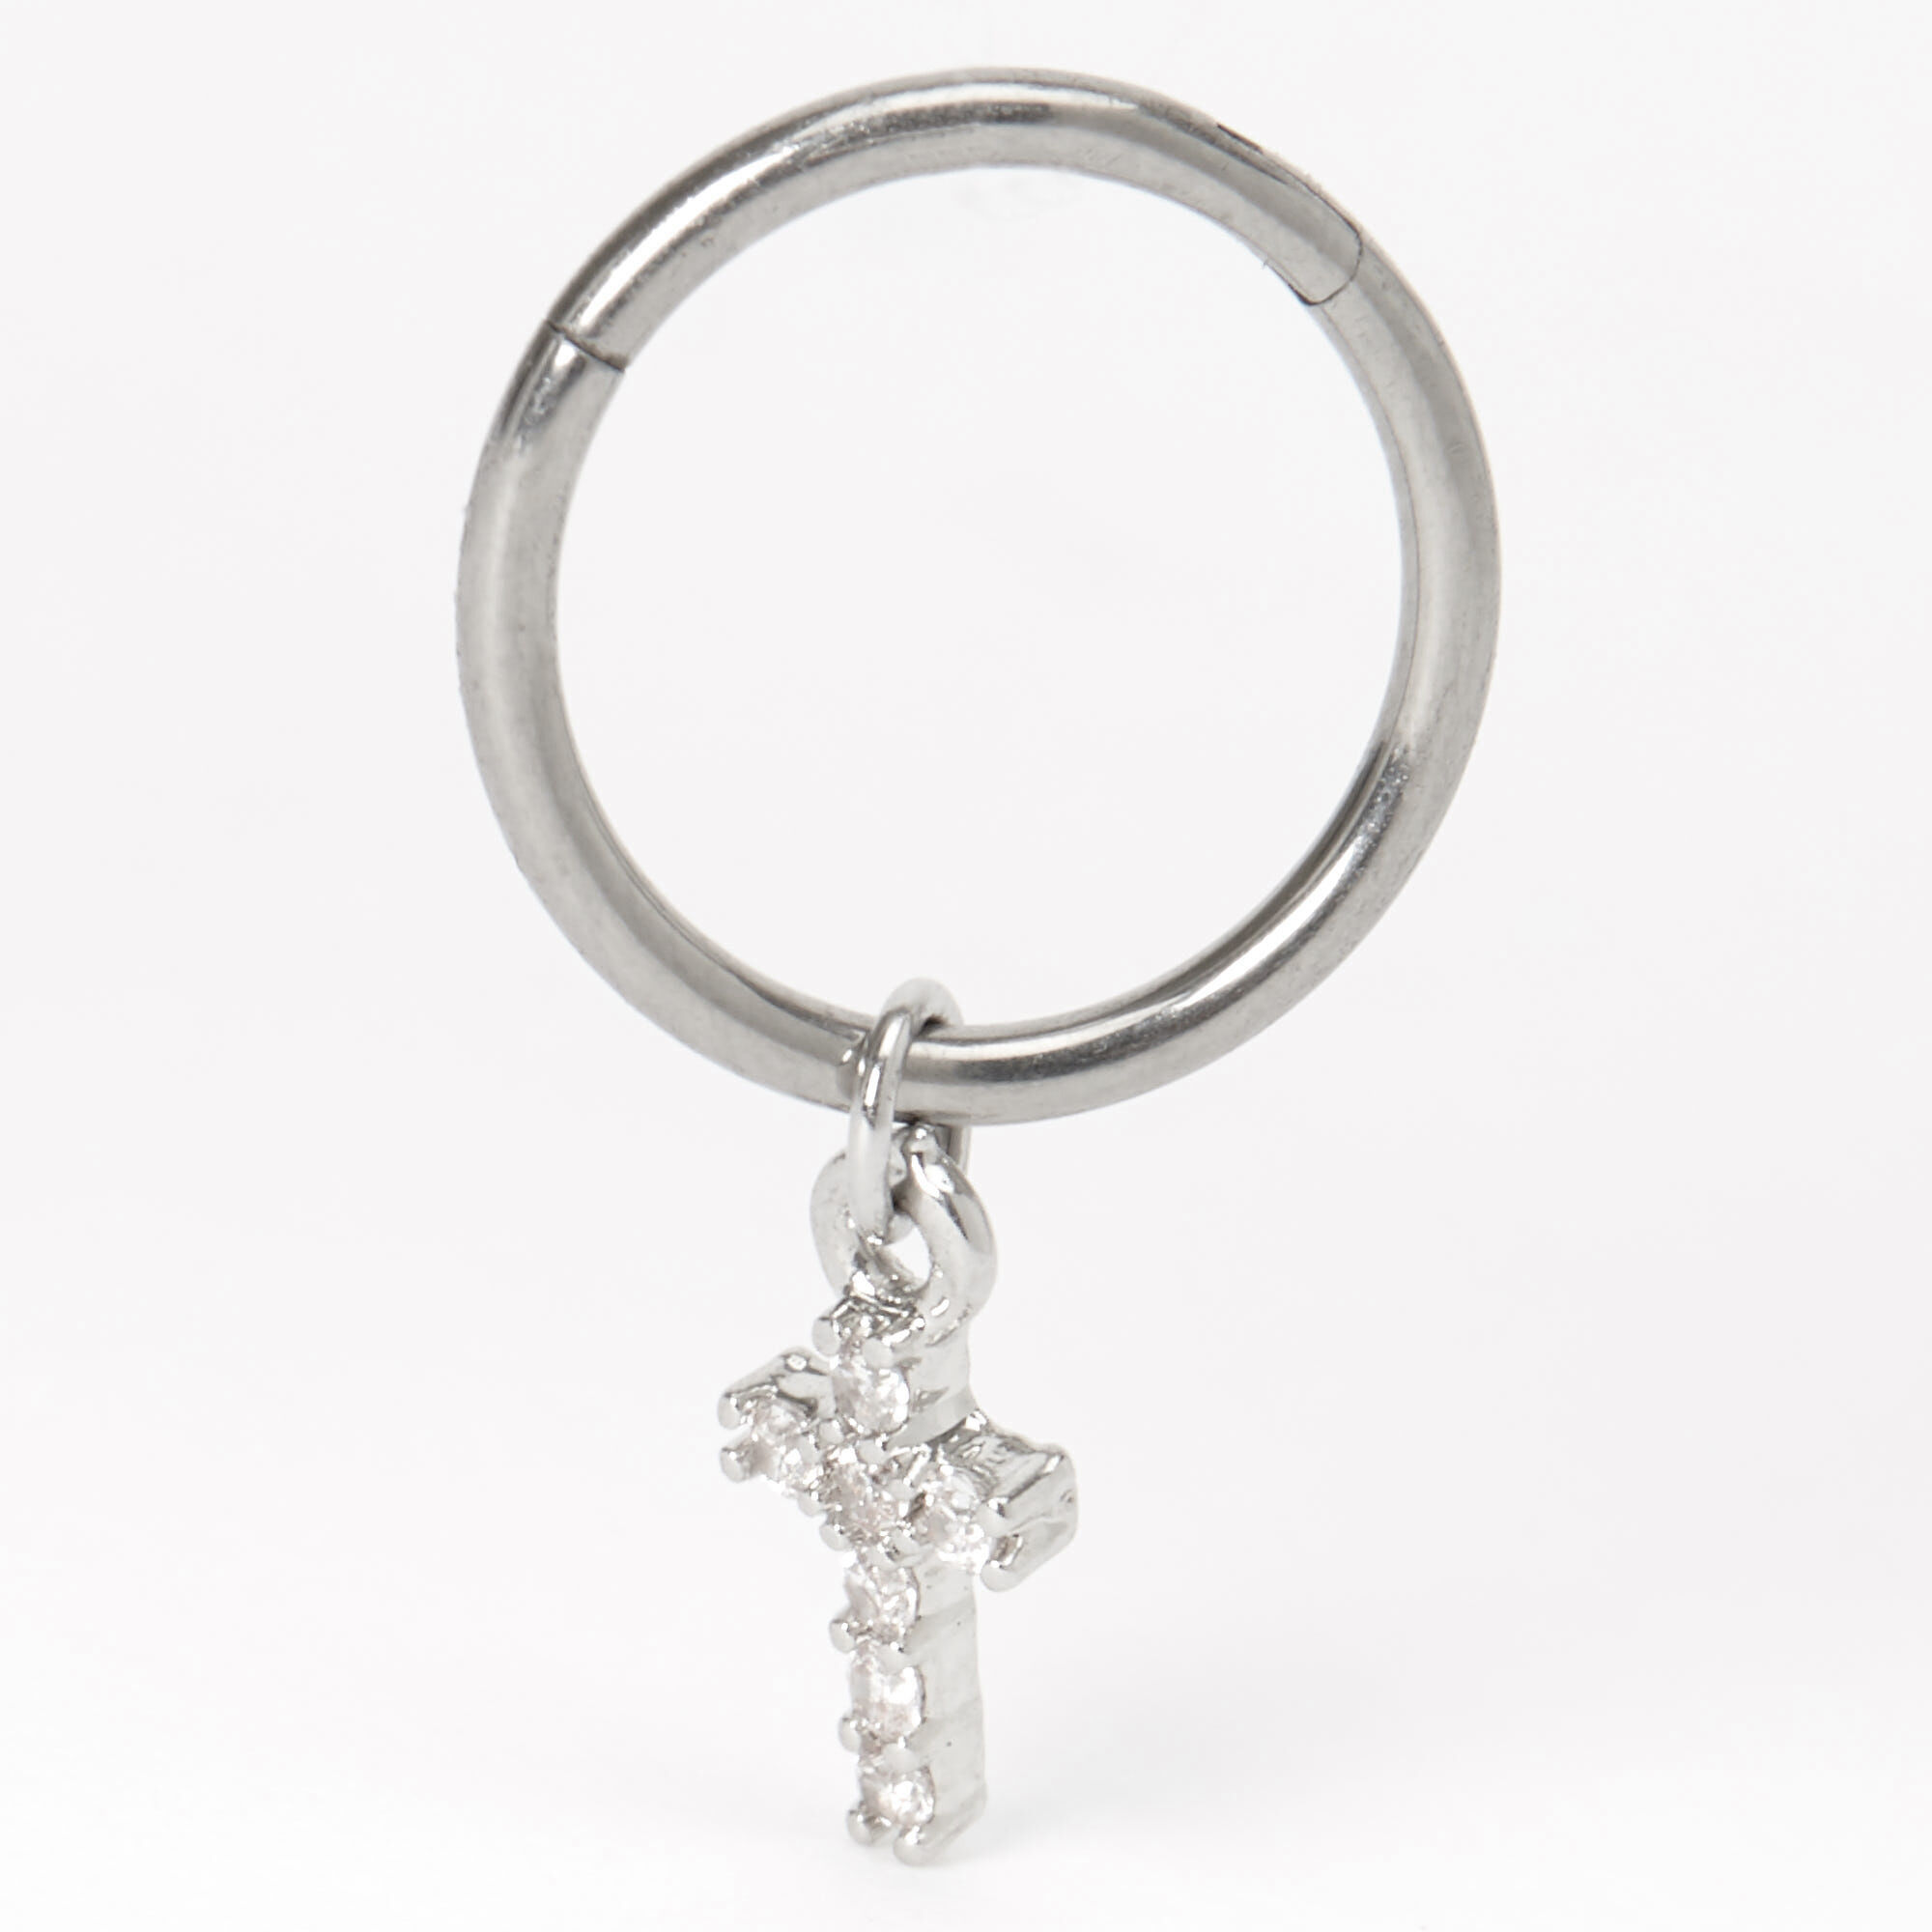 View Claires Tone Titanium 16G Crystal Cross Charm Cartilage Earring Silver information